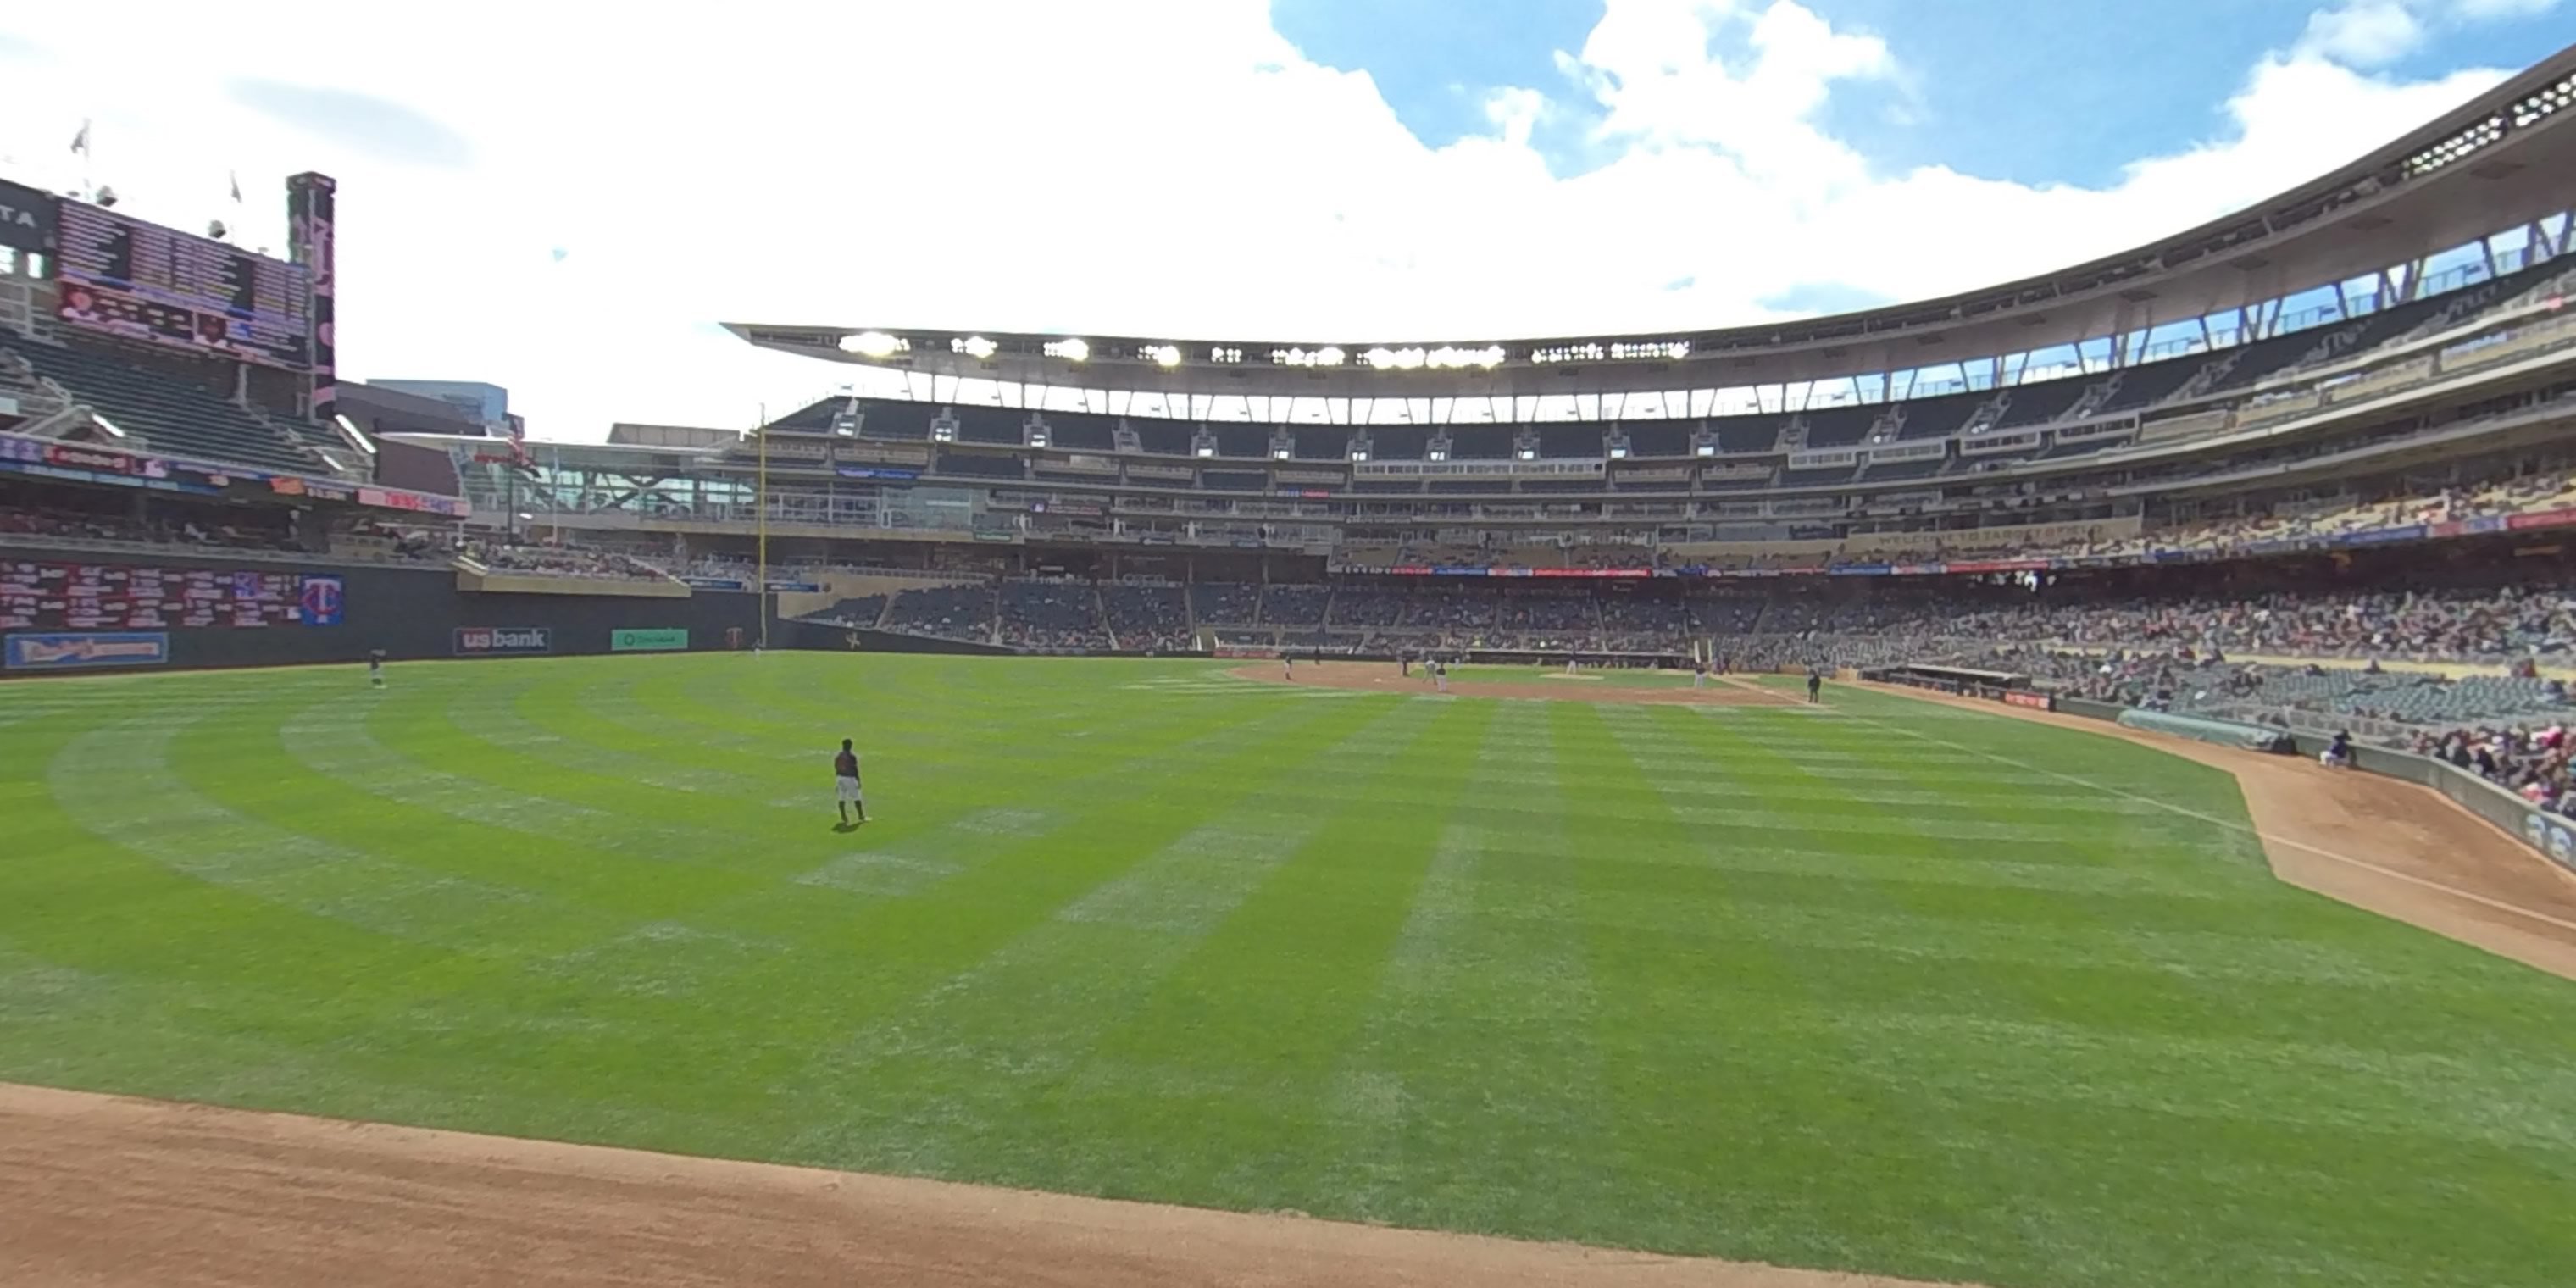 section 128 panoramic seat view  - target field